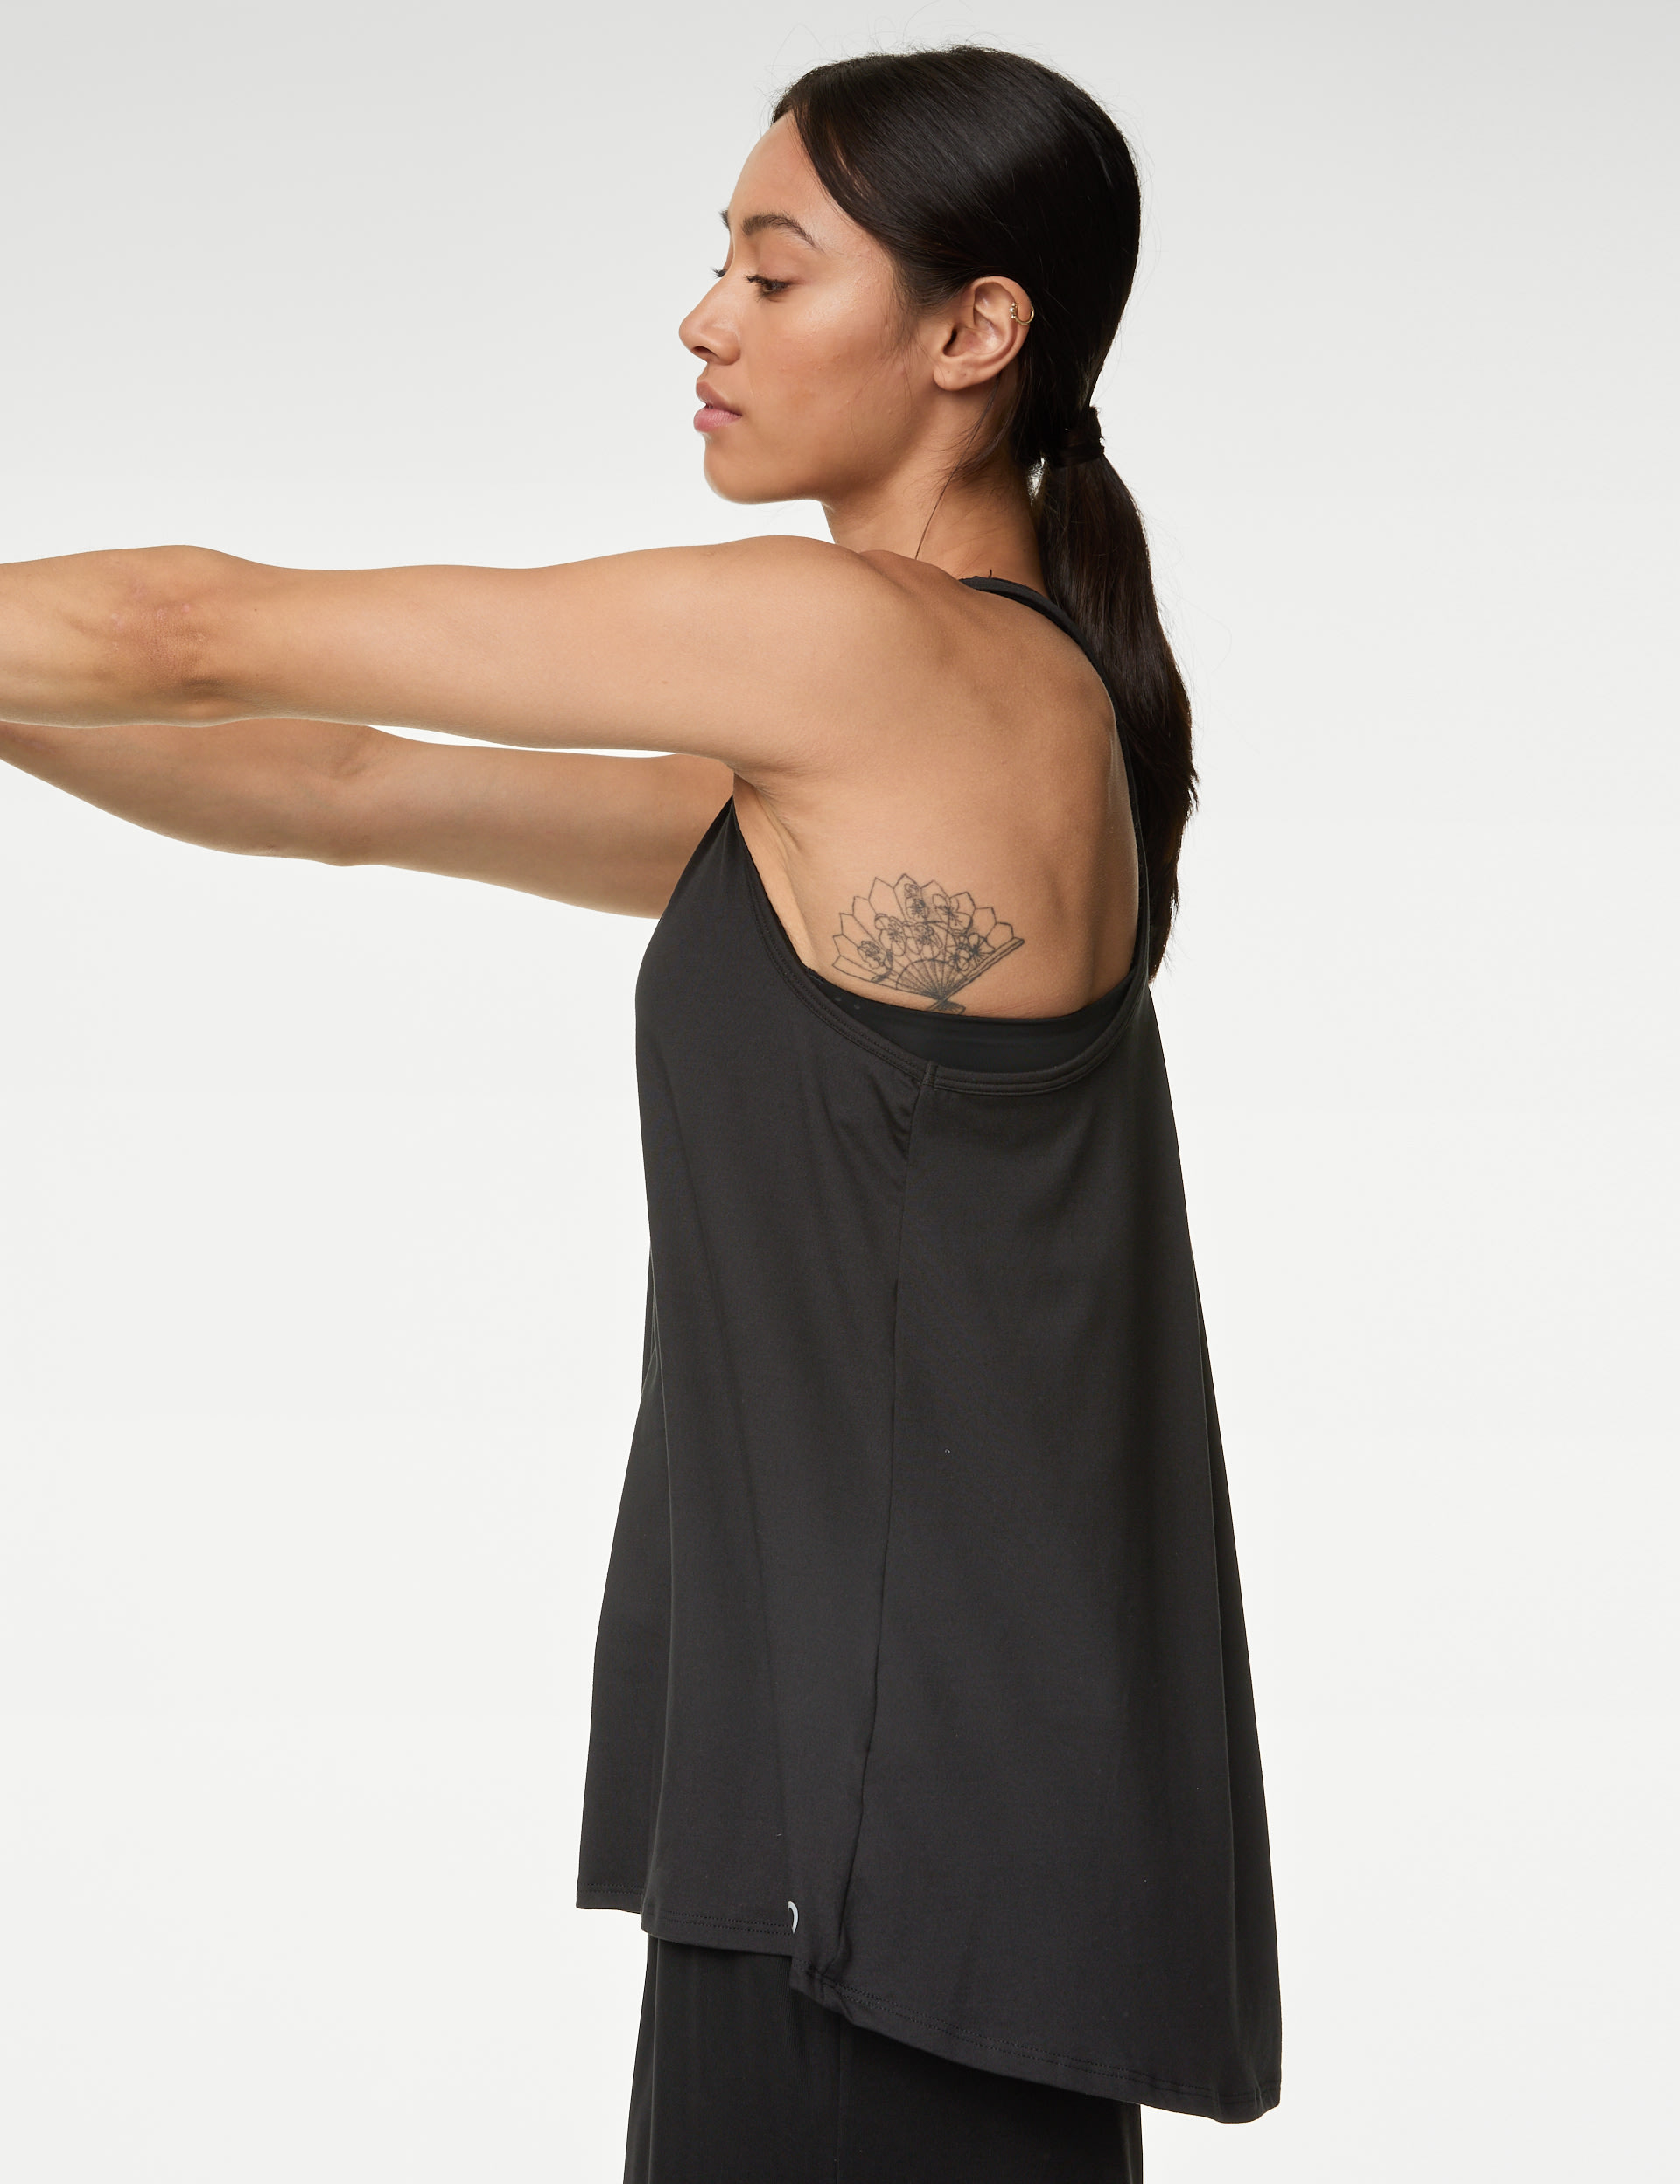 Relaxed Pleat Back Yoga Vest 4 of 6